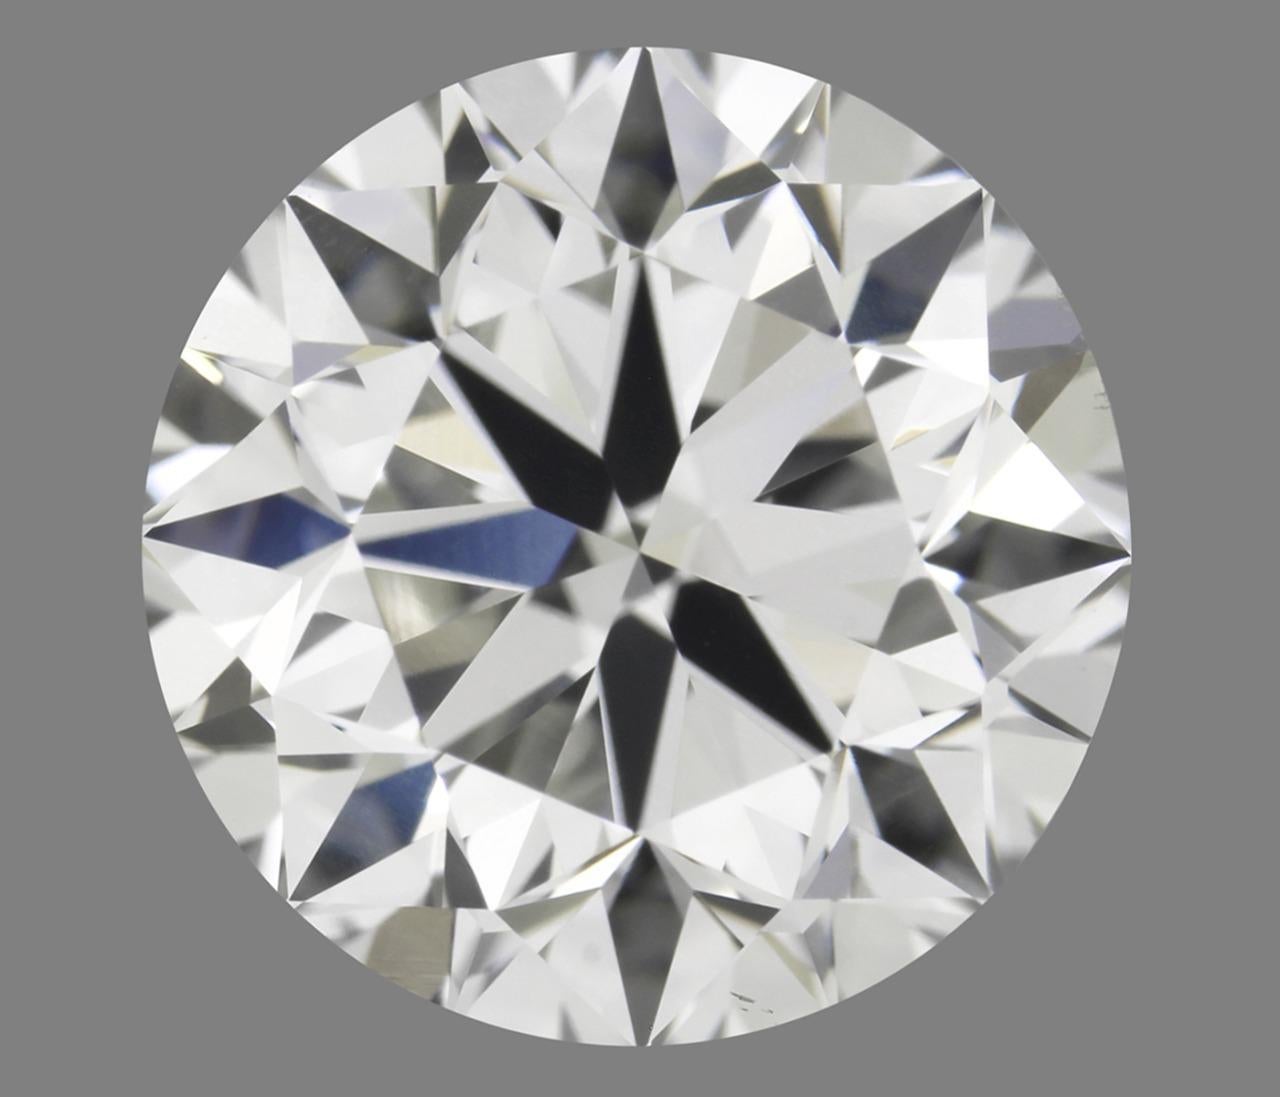 GIA Certified 0.50 Carat Brilliant Cut, Excellent Natural Diamond

Perfect Brilliants for perfect gifts.

5 C's:
Certificate: GIA
Carat: 0.50ct
Color: D
Clarity: FL(Flawless)
Cut: Excellent

Polish: Excellent
Symmetry: Excellent
Fluorescence: